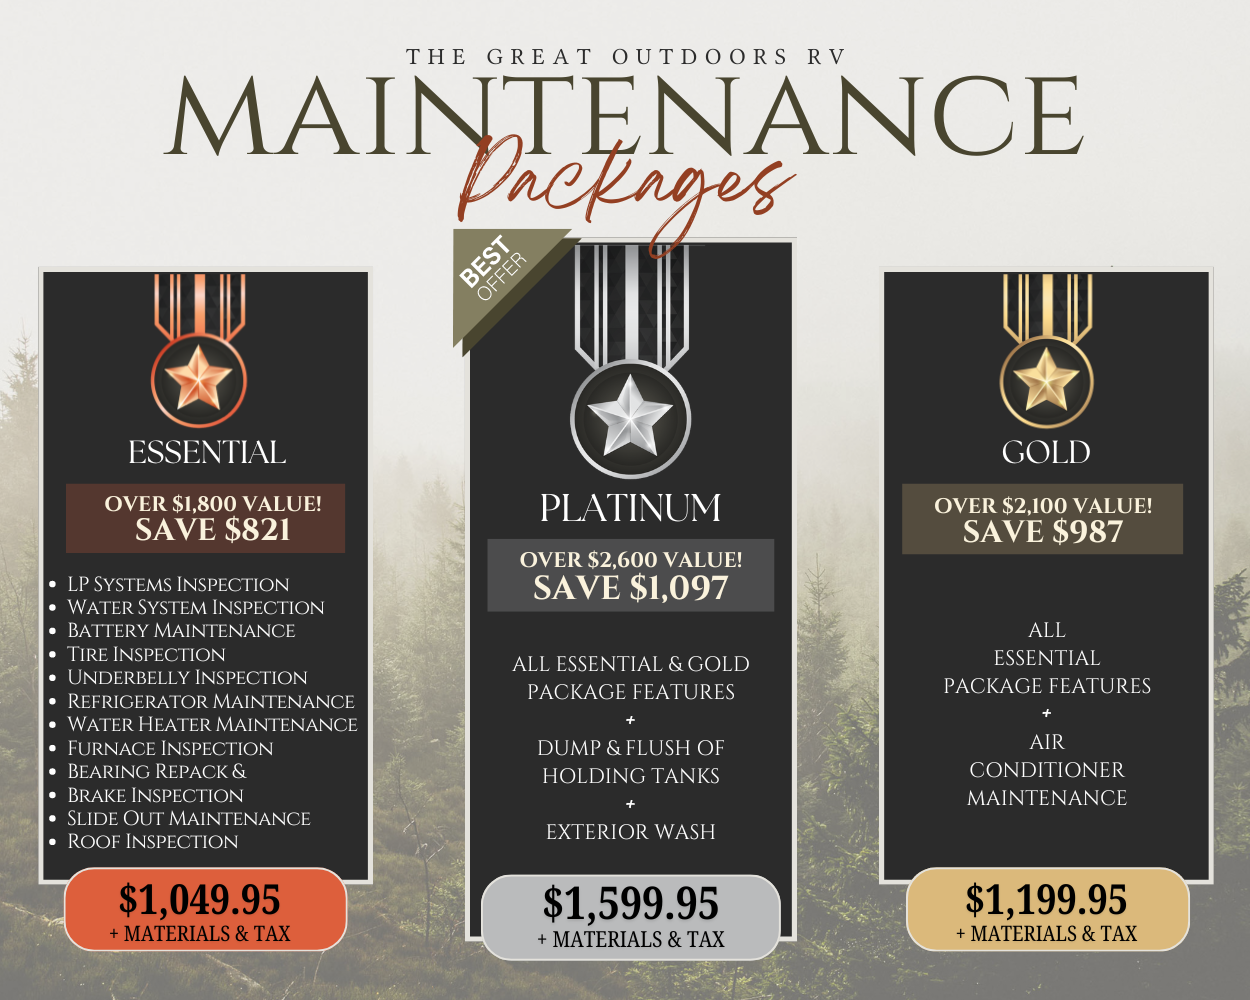 Annual Maintenance Packages